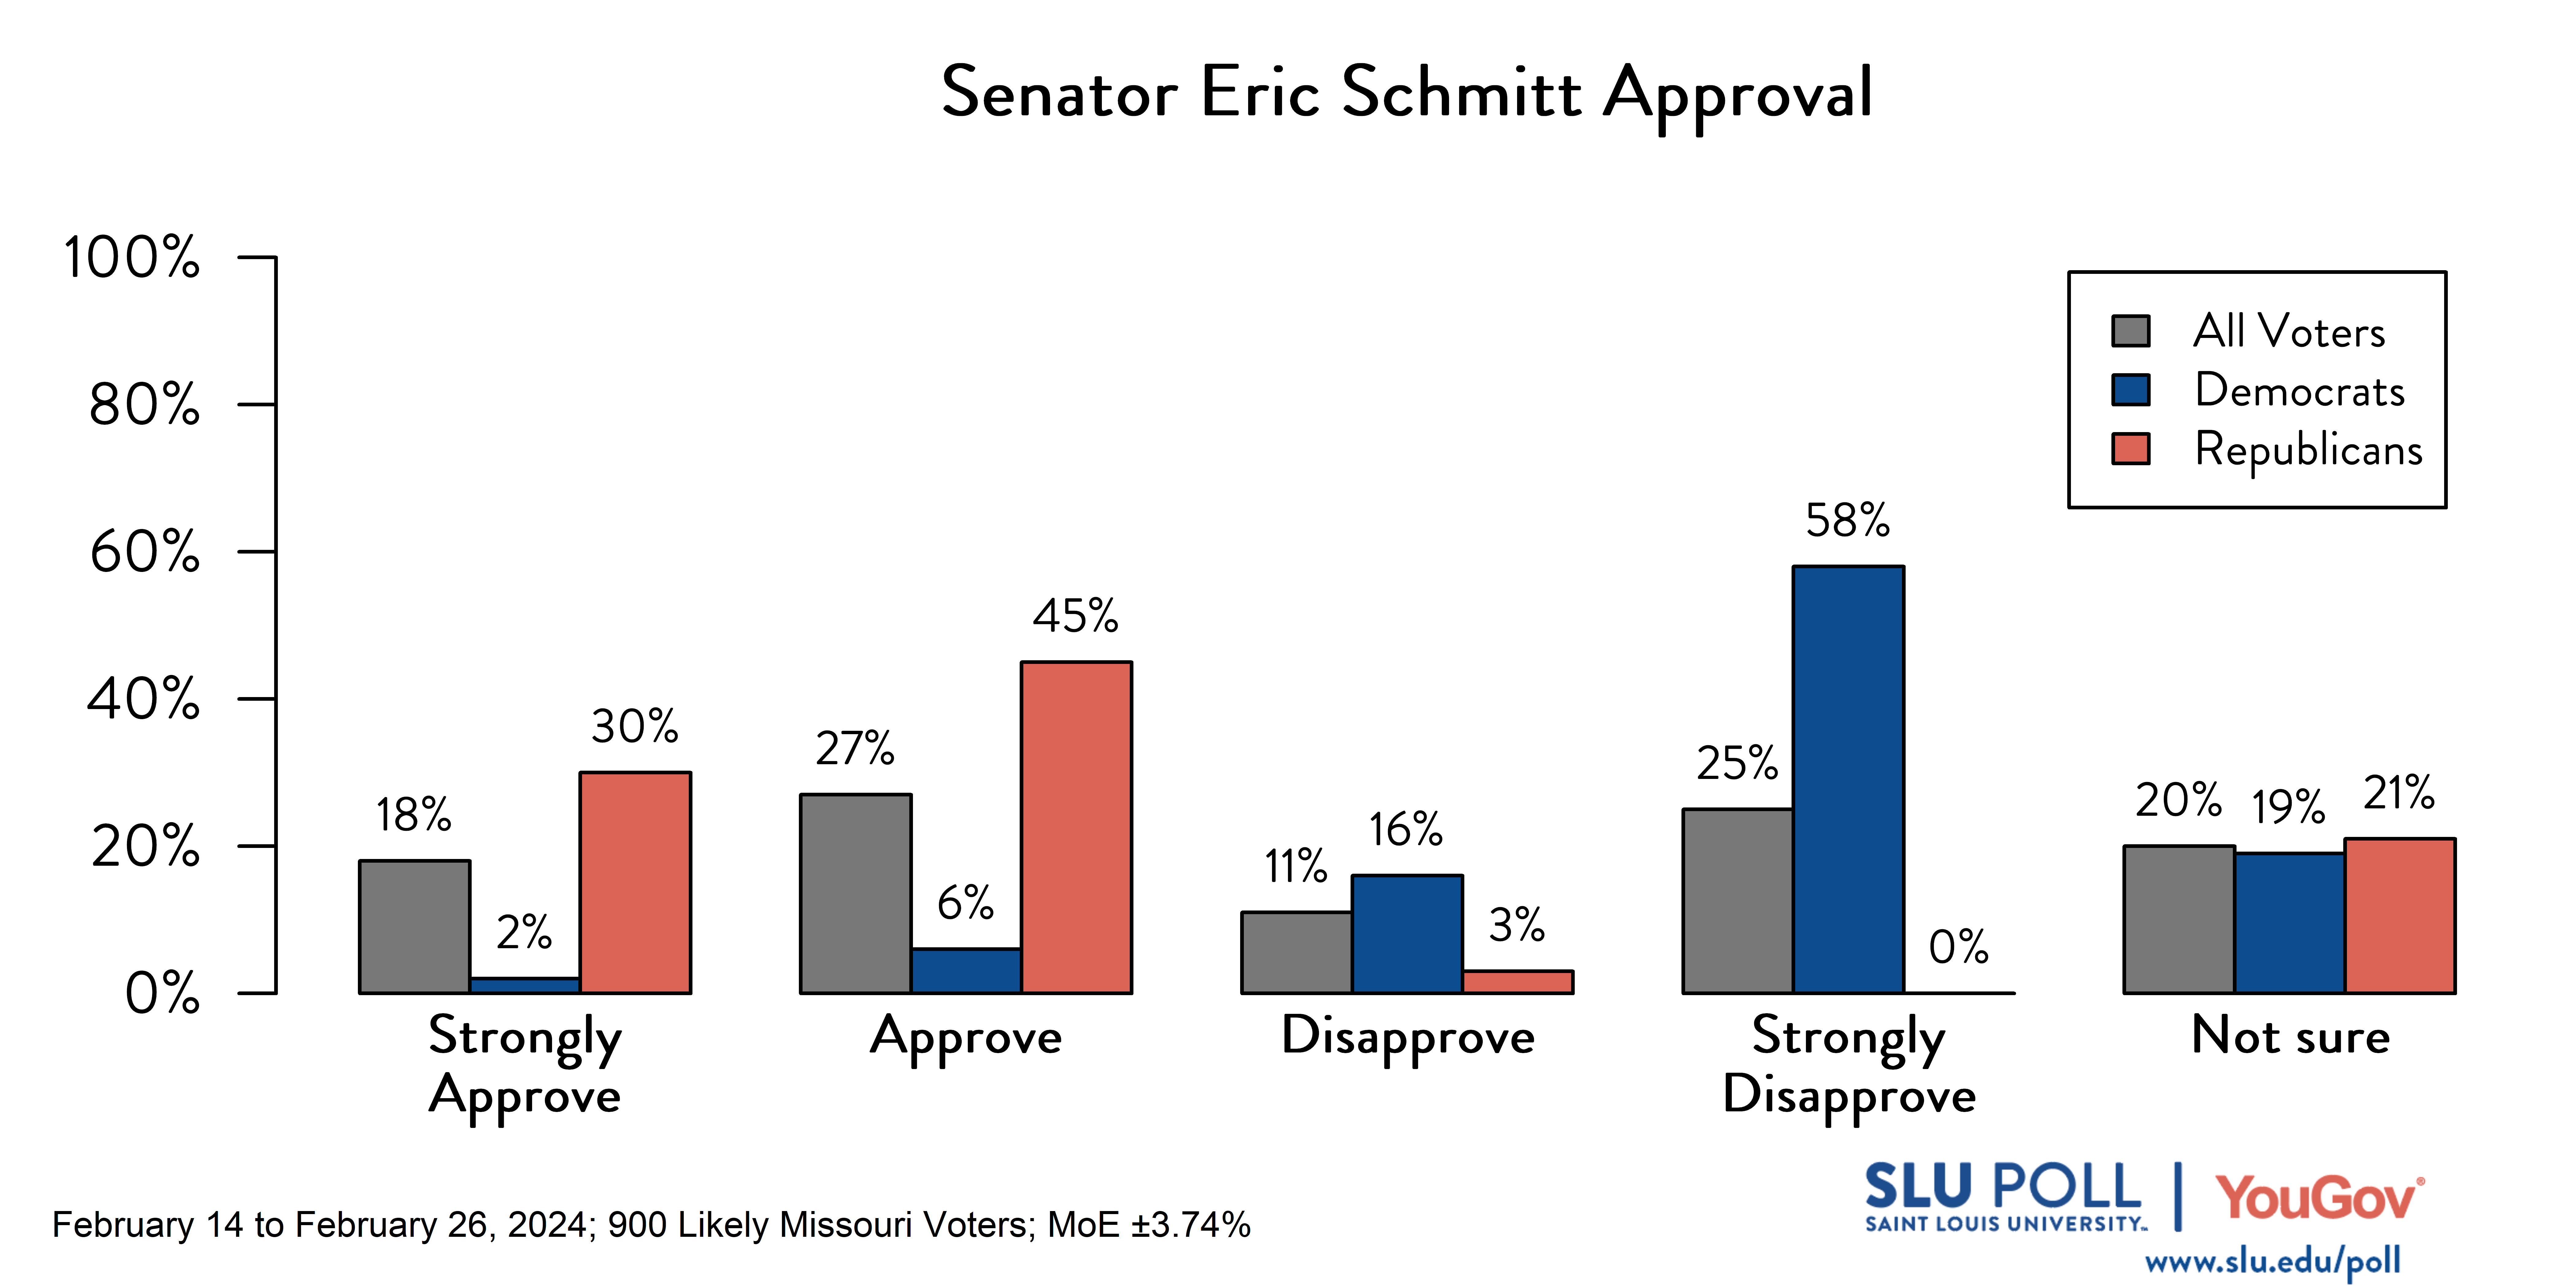 Likely voters' responses to 'Do you approve or disapprove of the way each is doing their job…Senator Eric Schmitt?': 18% Strongly approve, 27% Approve, 11% Disapprove, 25% Strongly disapprove, and 20% Not sure. Democratic voters' responses: ' 2% Strongly approve, 6% Approve, 16% Disapprove, 58% Strongly disapprove, and 19% Not sure. Republican voters' responses:  30% Strongly approve, 45% Approve, 3% Disapprove, 0% Strongly disapprove, and 21% Not sure.